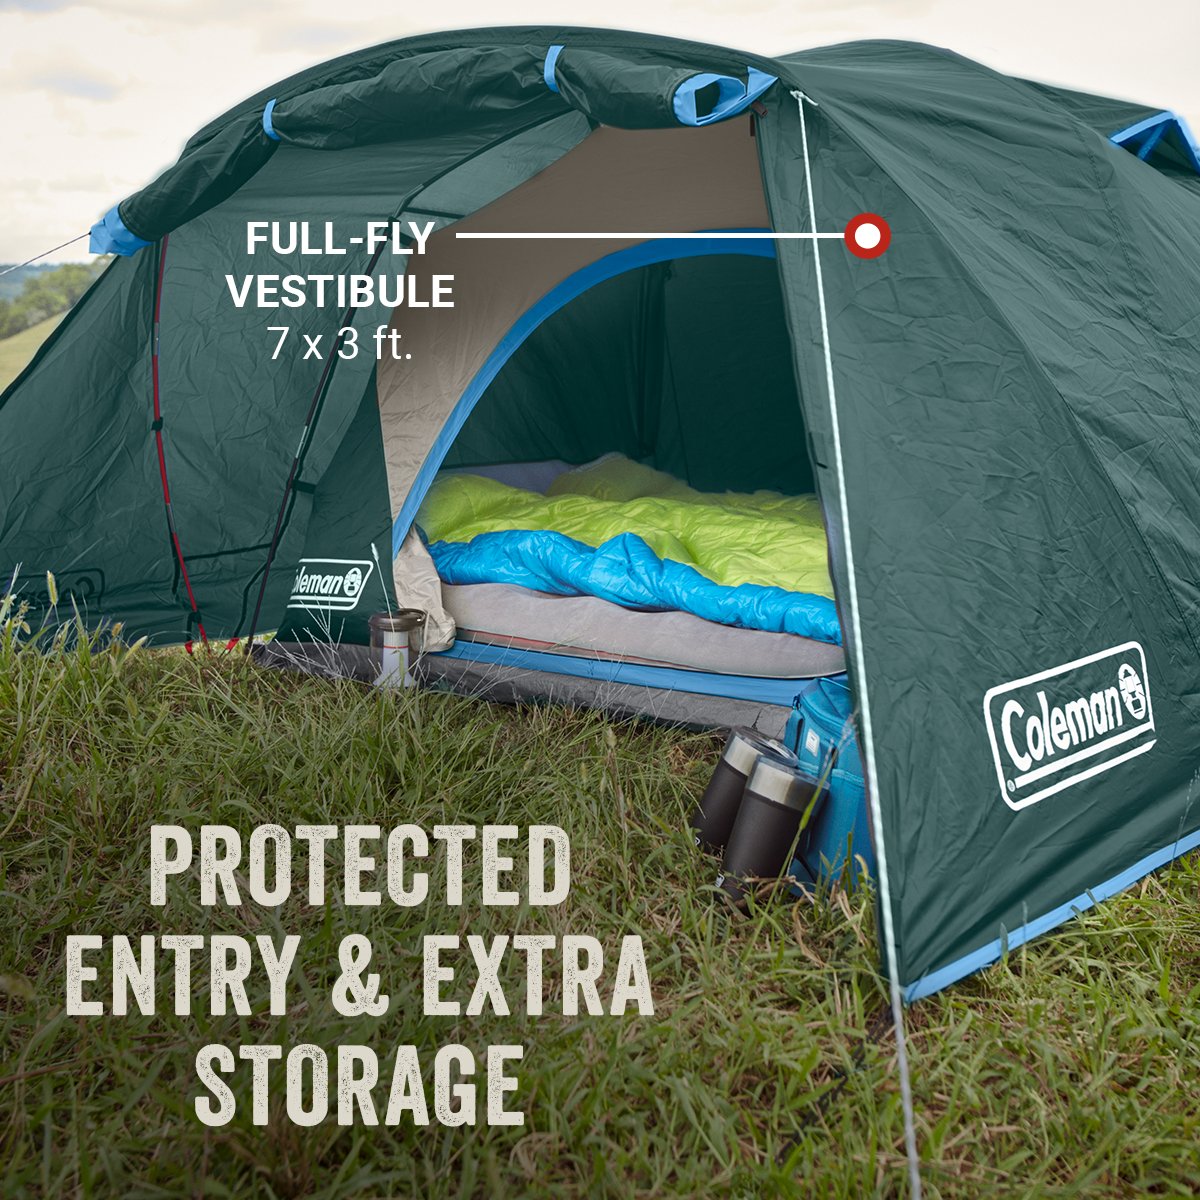 Skydome™ 2-Person Camping Tent with Full-Fly Vestibule 